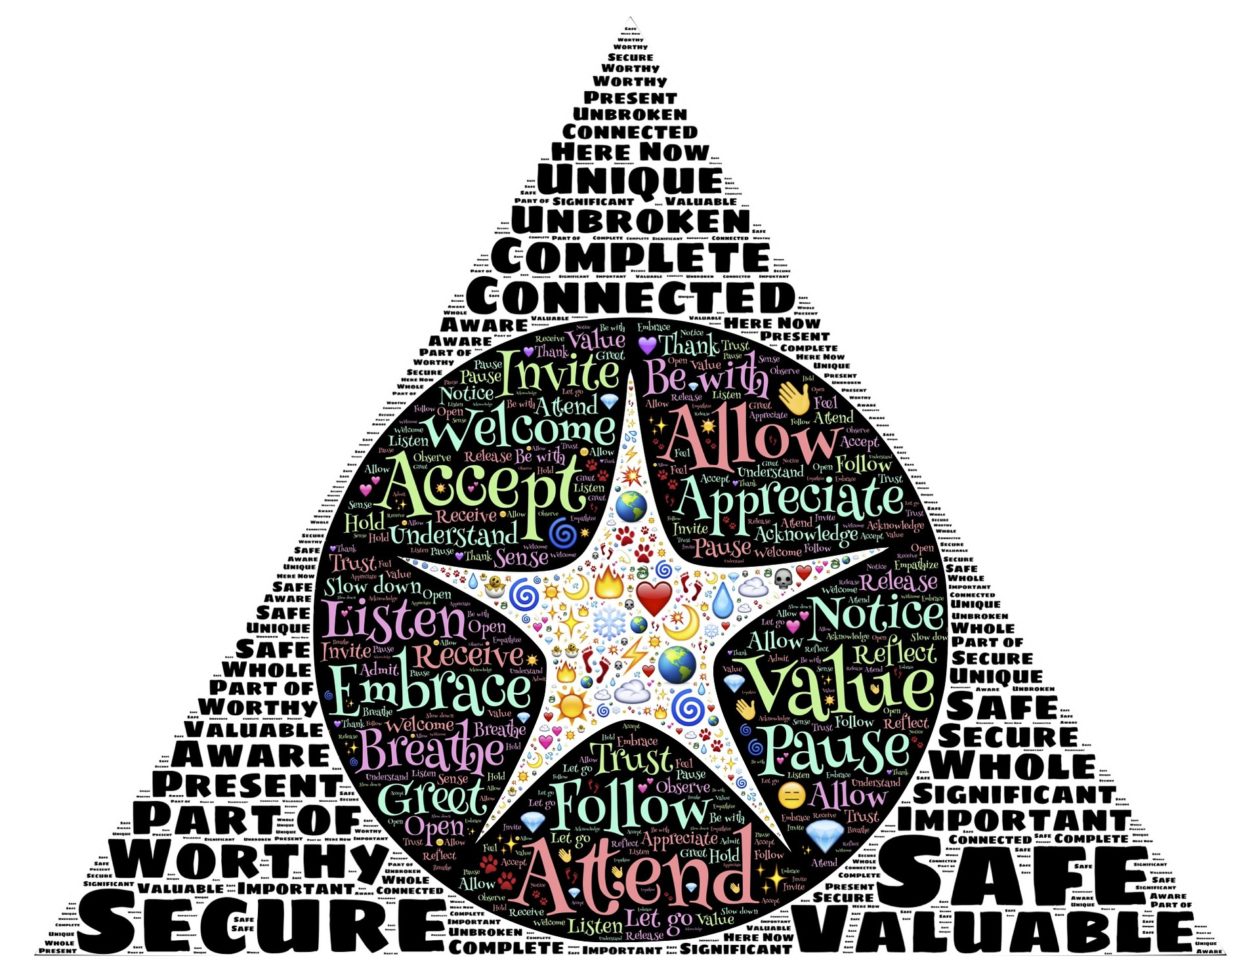 Image of star and circle inside triangle with words such as safe, secure, valued to demonstrate nurturing principles